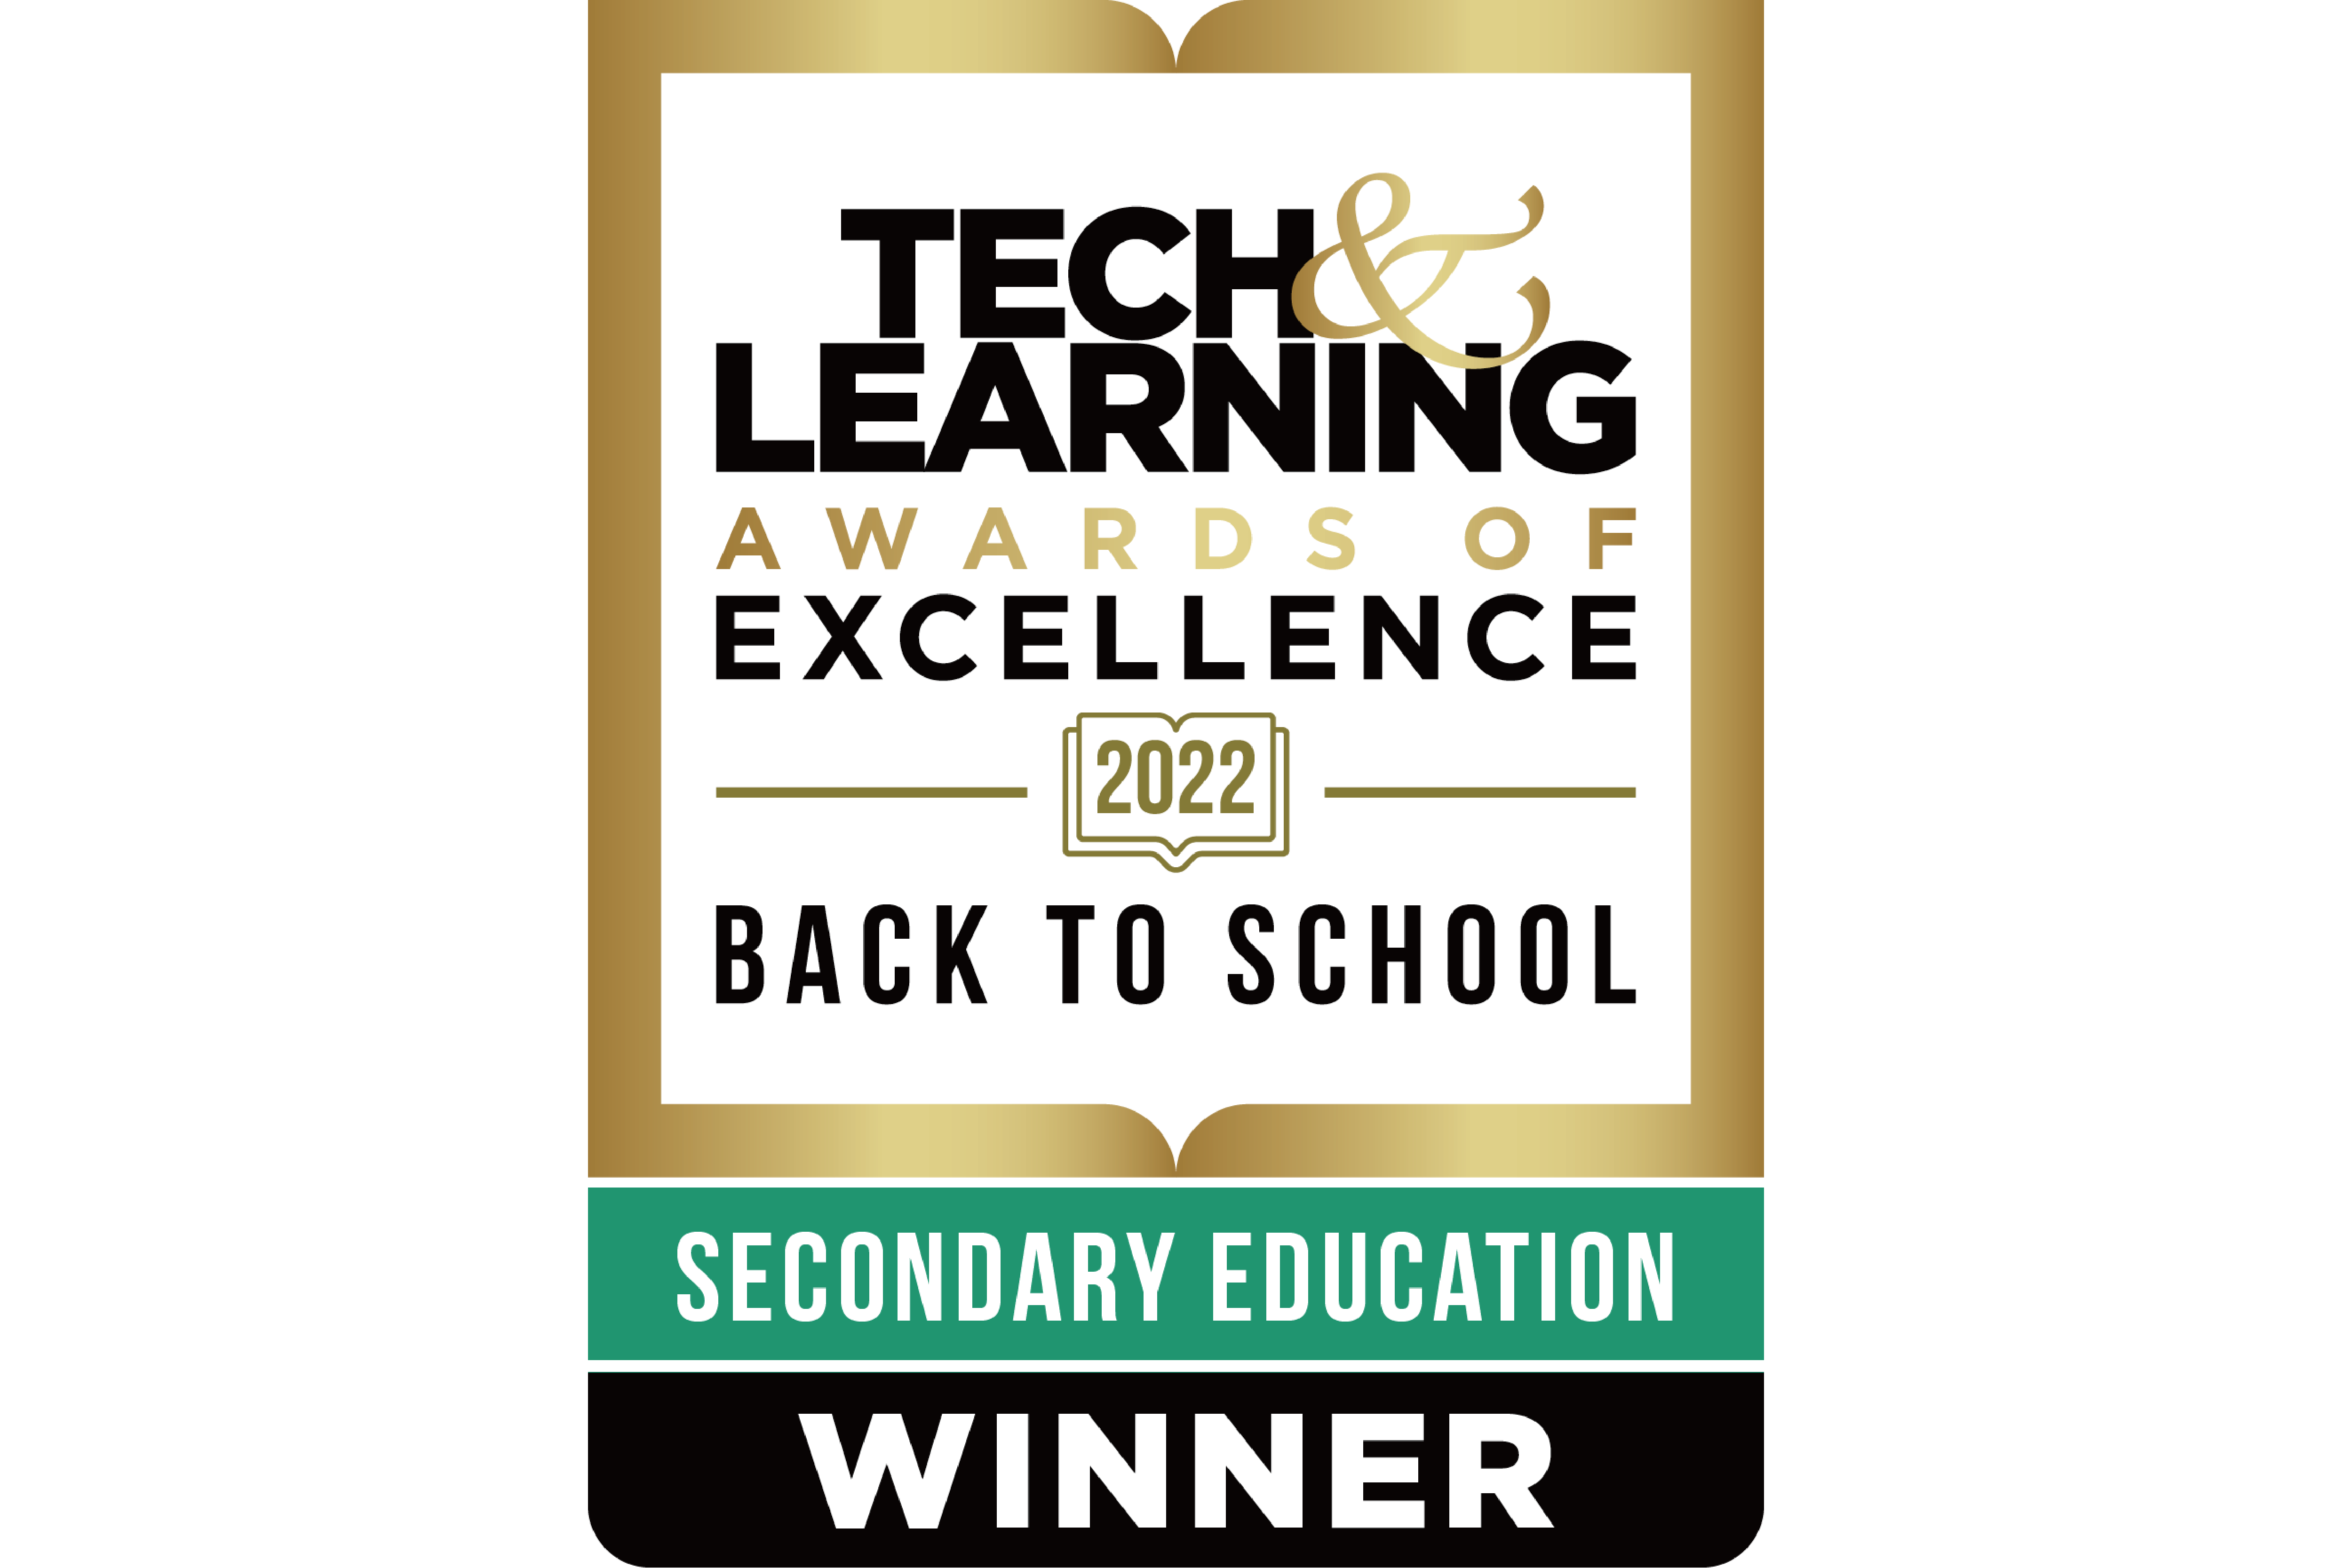 2022_Tech & Learning Awards of Excellence: Back to School 2022.